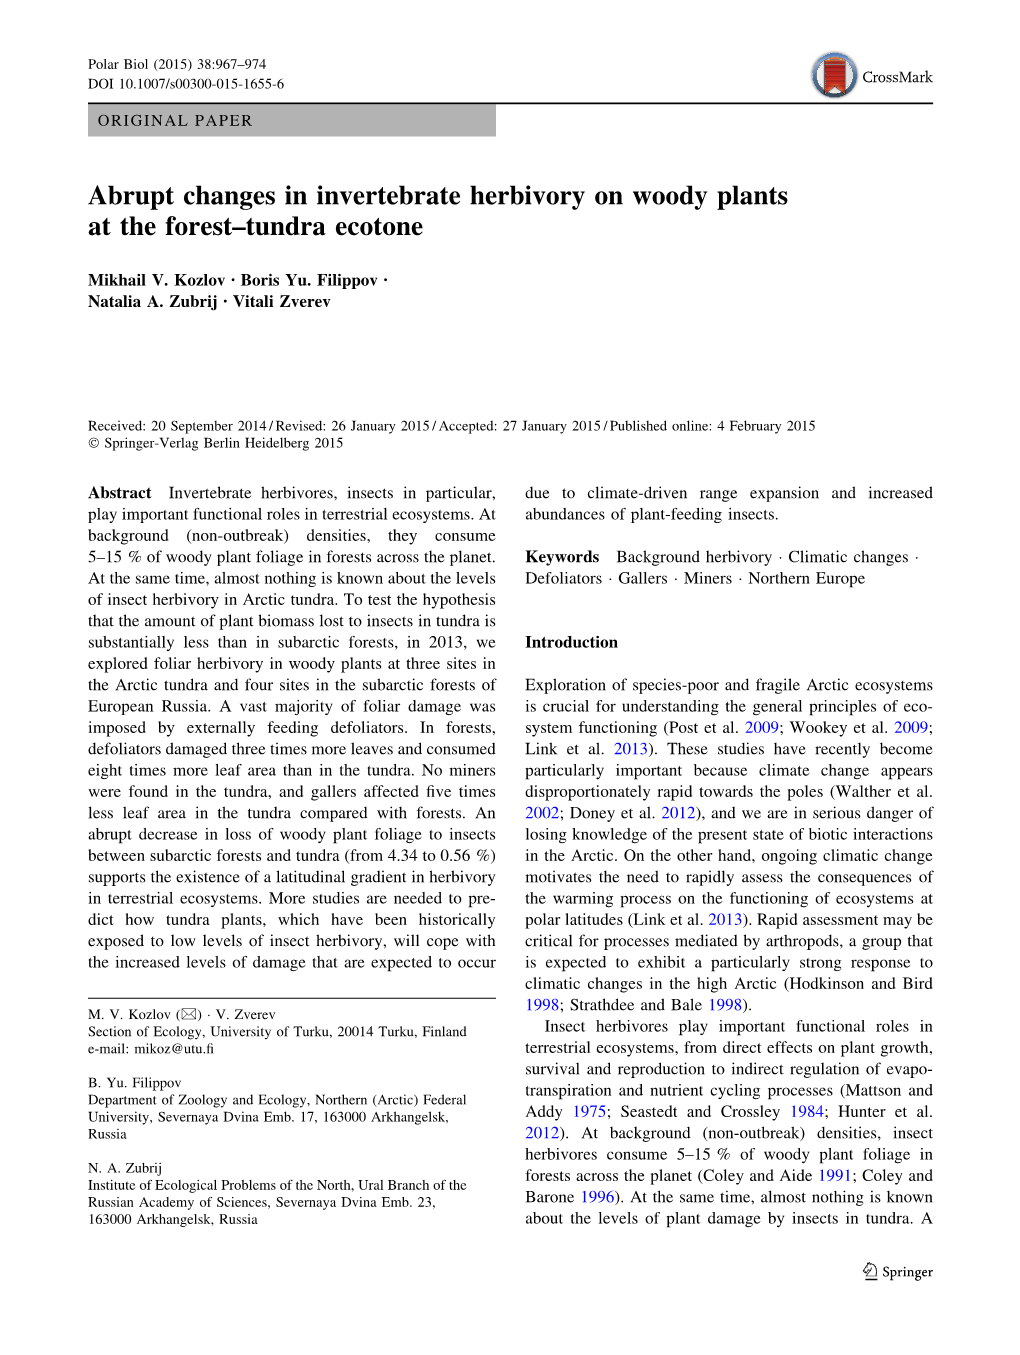 Abrupt Changes in Invertebrate Herbivory on Woody Plants at the Forest–Tundra Ecotone